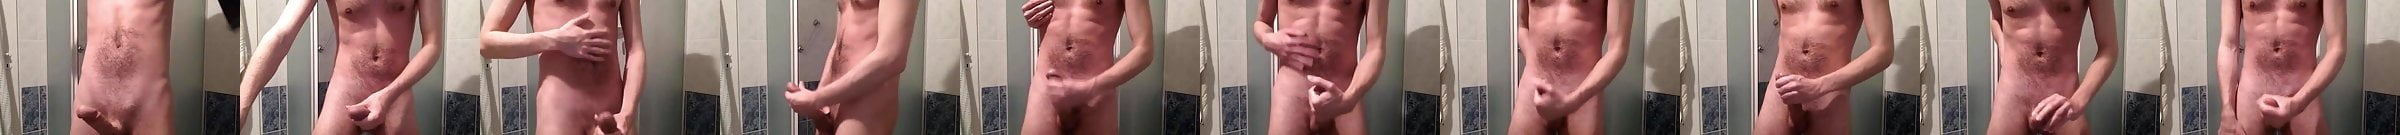 Flexing My Penis While Soft Doing A Male Kegel Exercise Xhamster